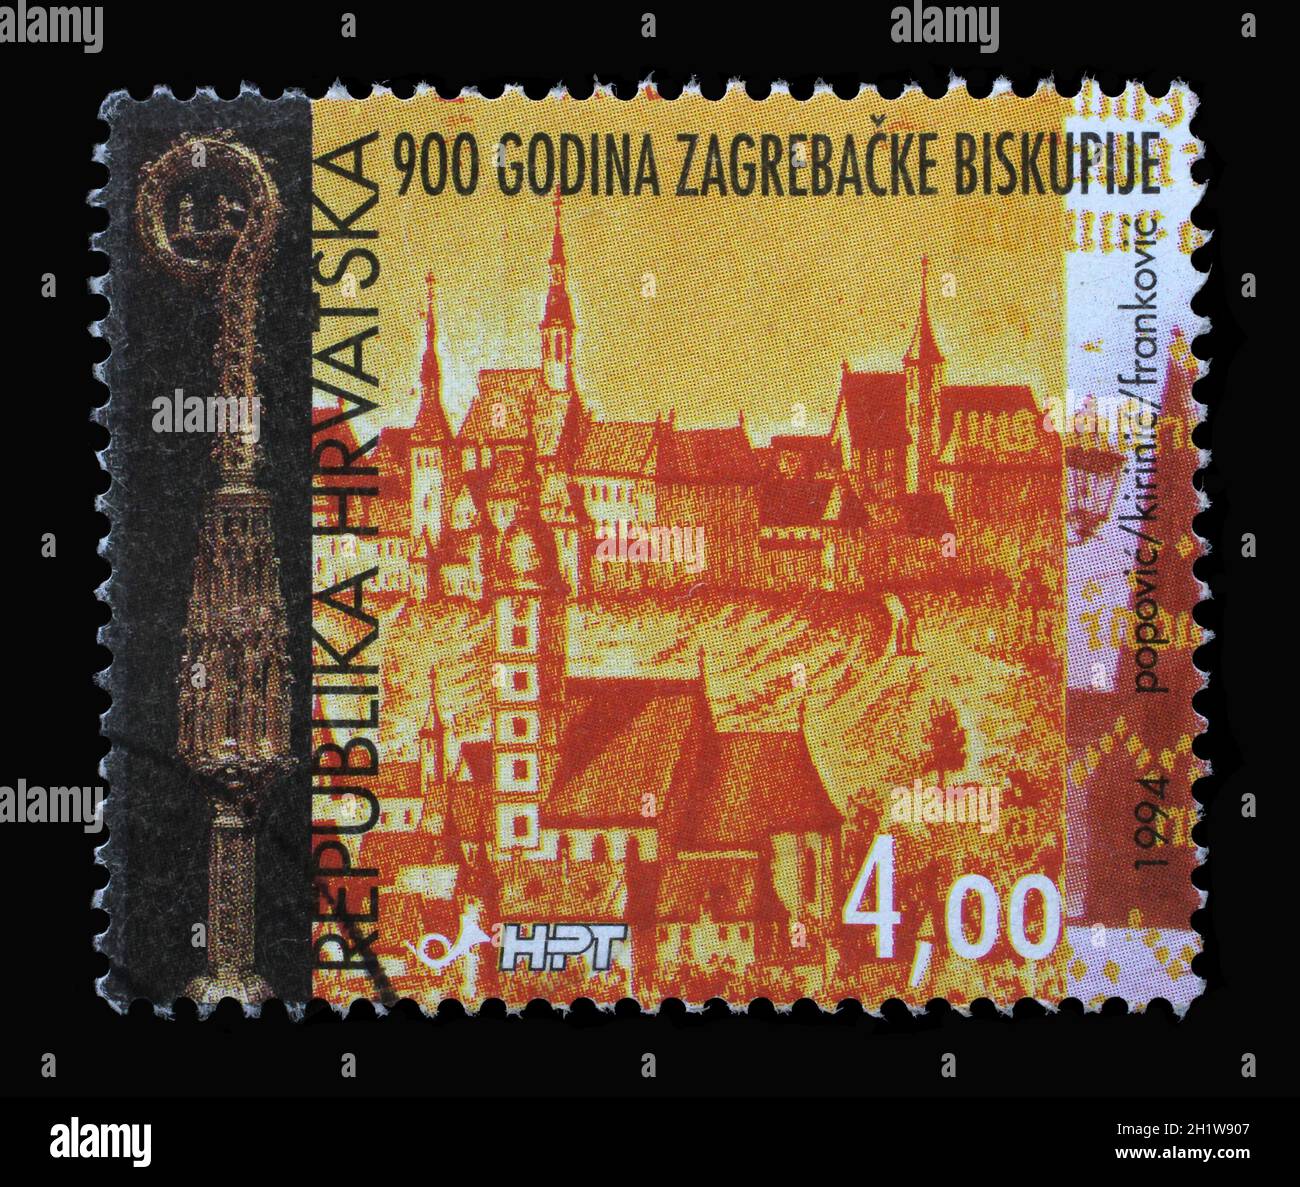 A stamp printed in Croatia shows Bishop's crosier and view of Zagreb by Valvasor, 900th Anniversaries of Zagreb and Zagreb Bishopric, circa 1994 Stock Photo